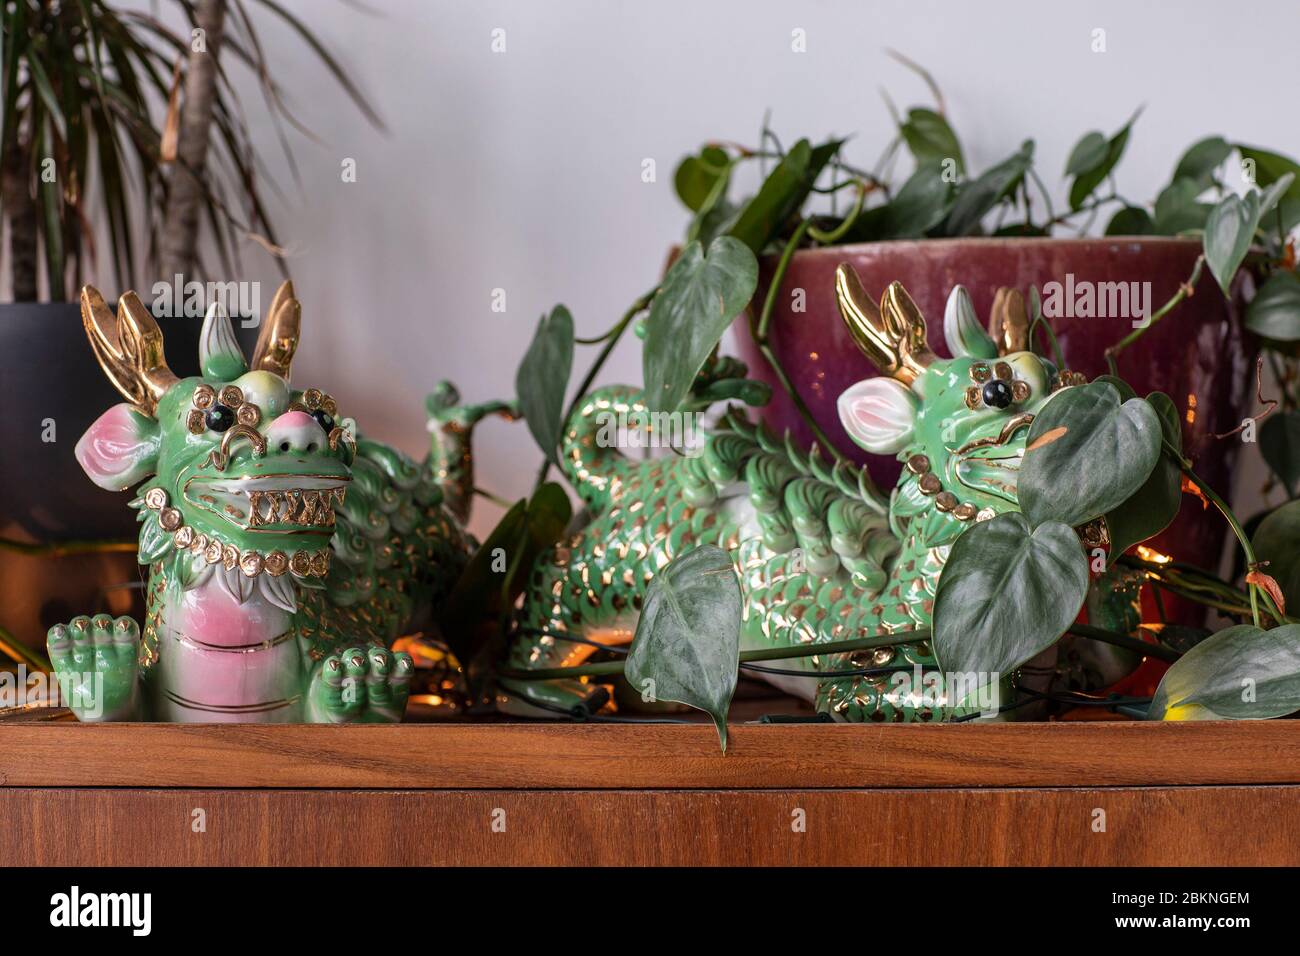 A detail of two green and gold colorful traditional Chinese ceramic dragon statues in a city loft interior on Strijp S, Eindhoven. A bohemian, modern, Stock Photo